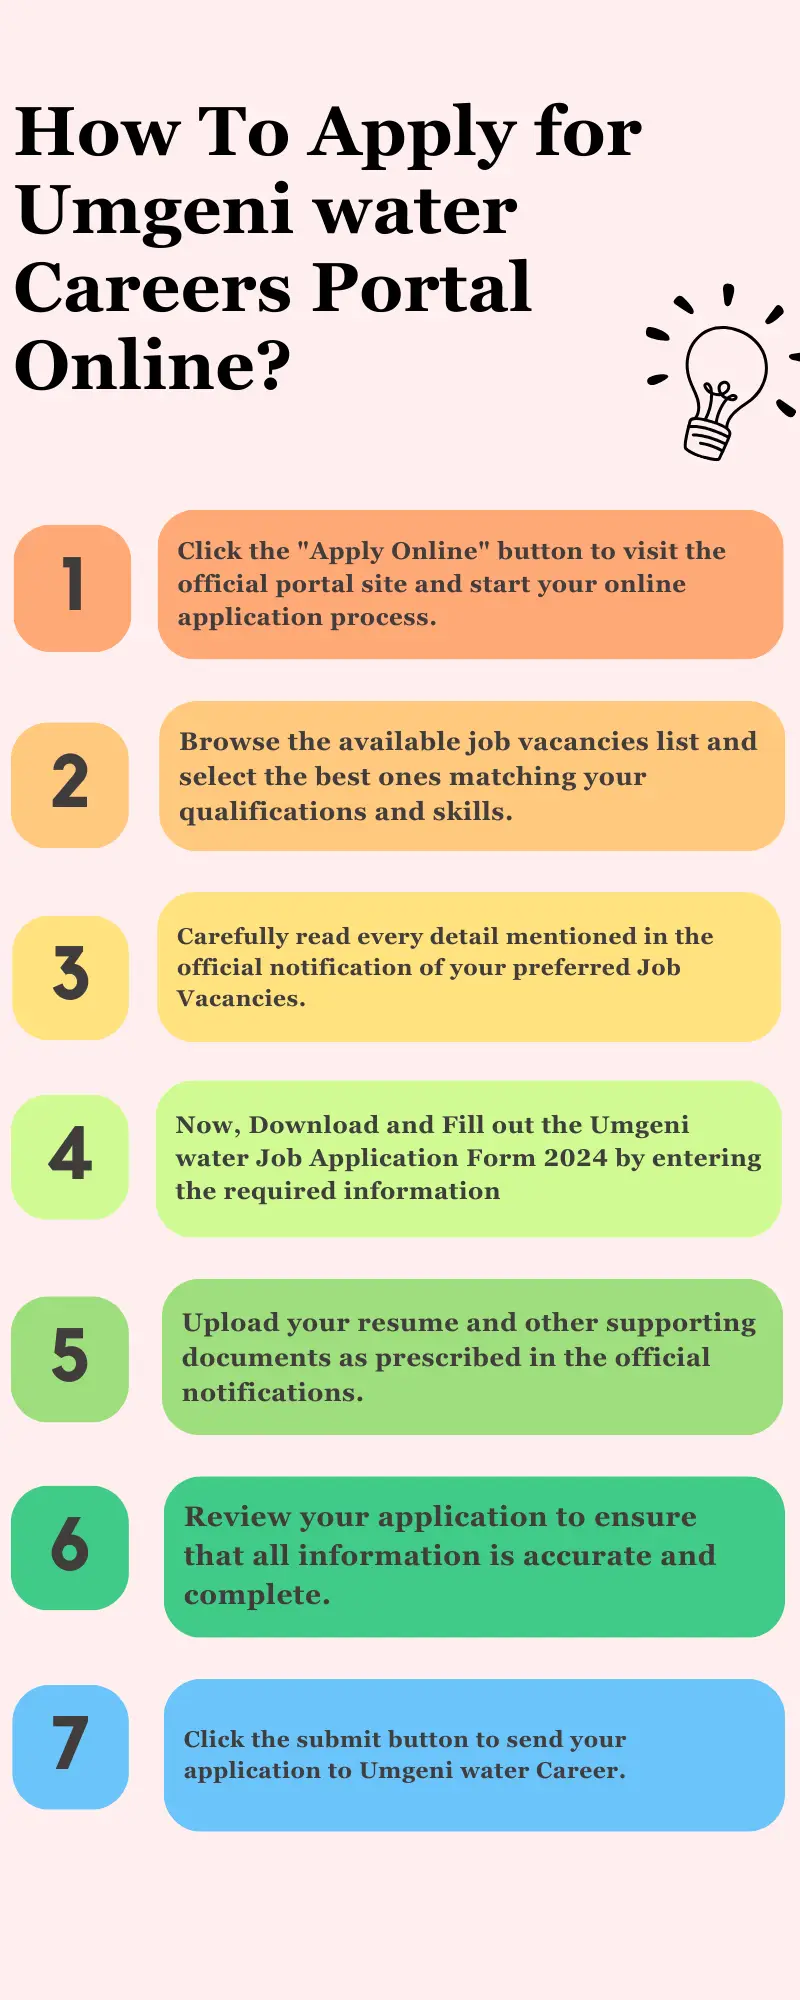 How To Apply for Umgeni water Careers Portal Online?